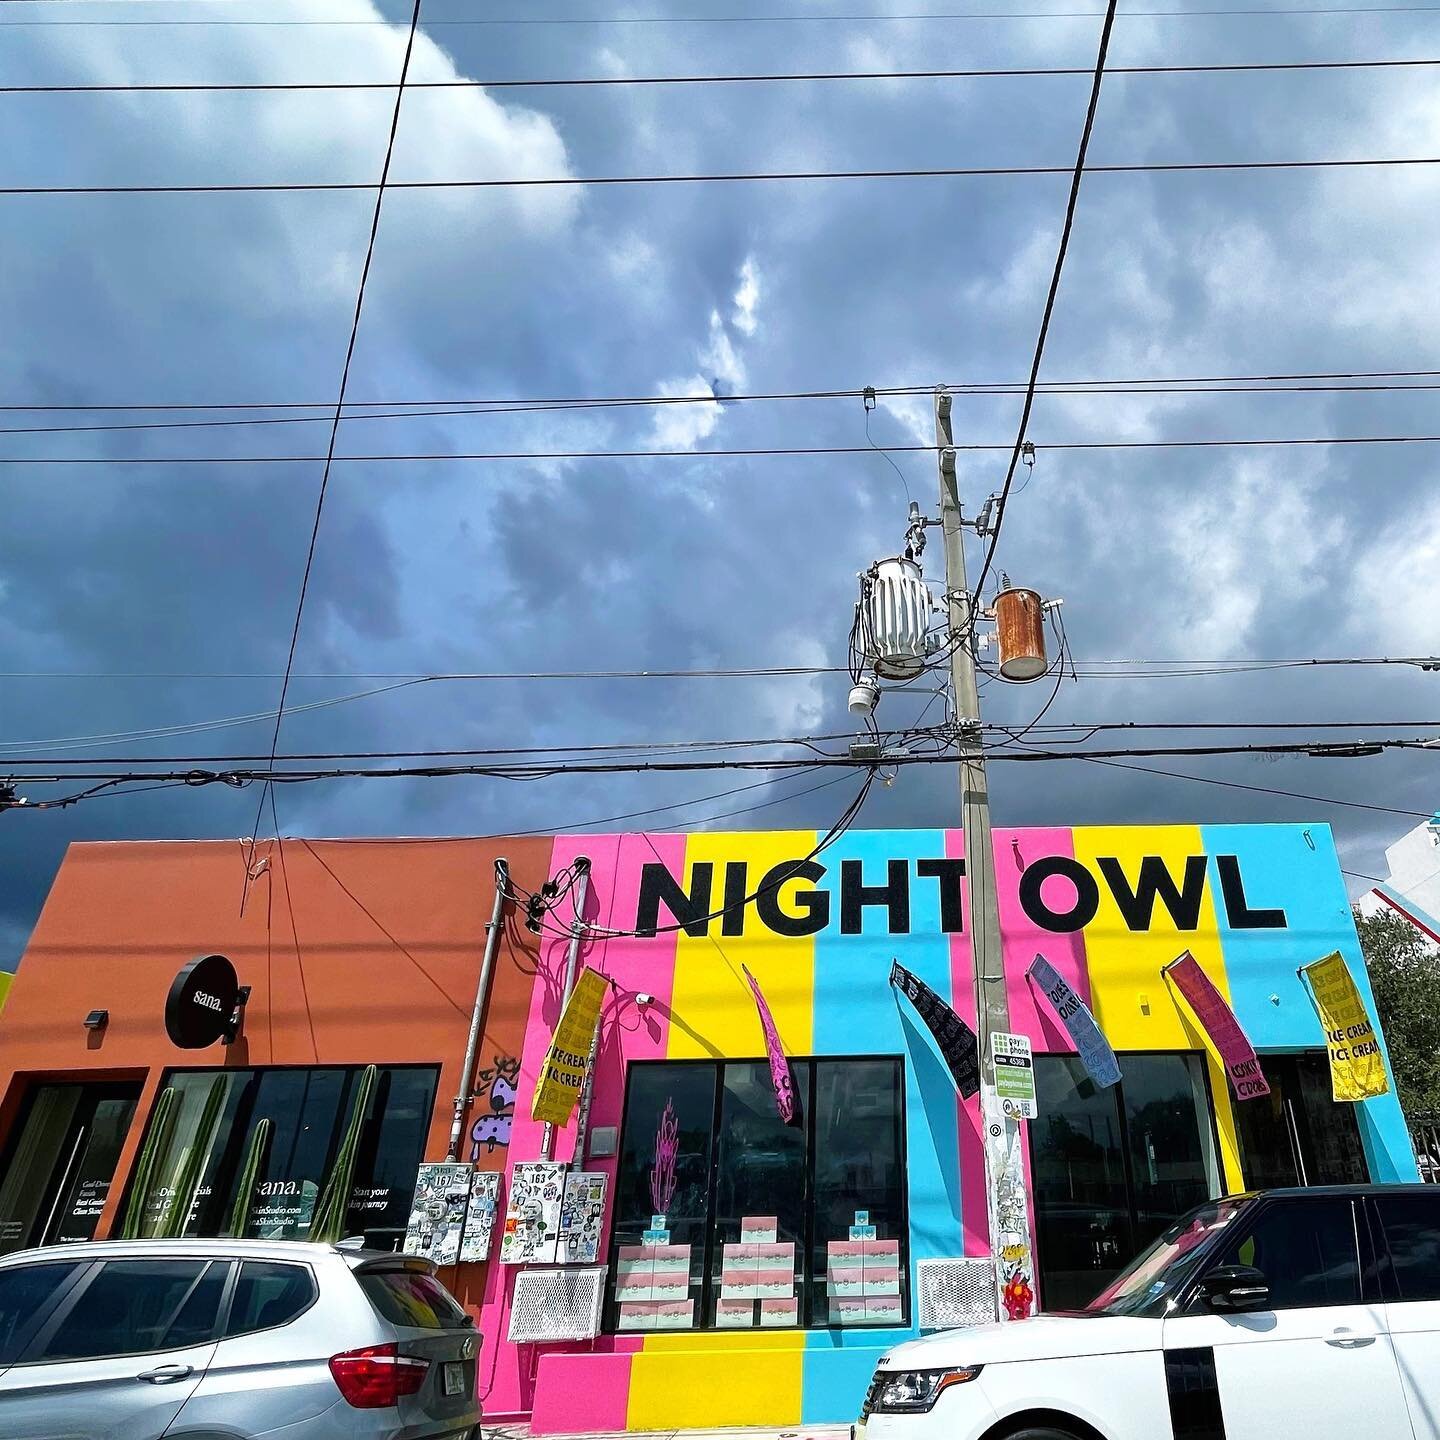 If you have a business with blank walls why not add some color, it'll draw attention in the best of ways, just look at this example for @nightowl! #mural #marketing #colorful #branding #businessexterior